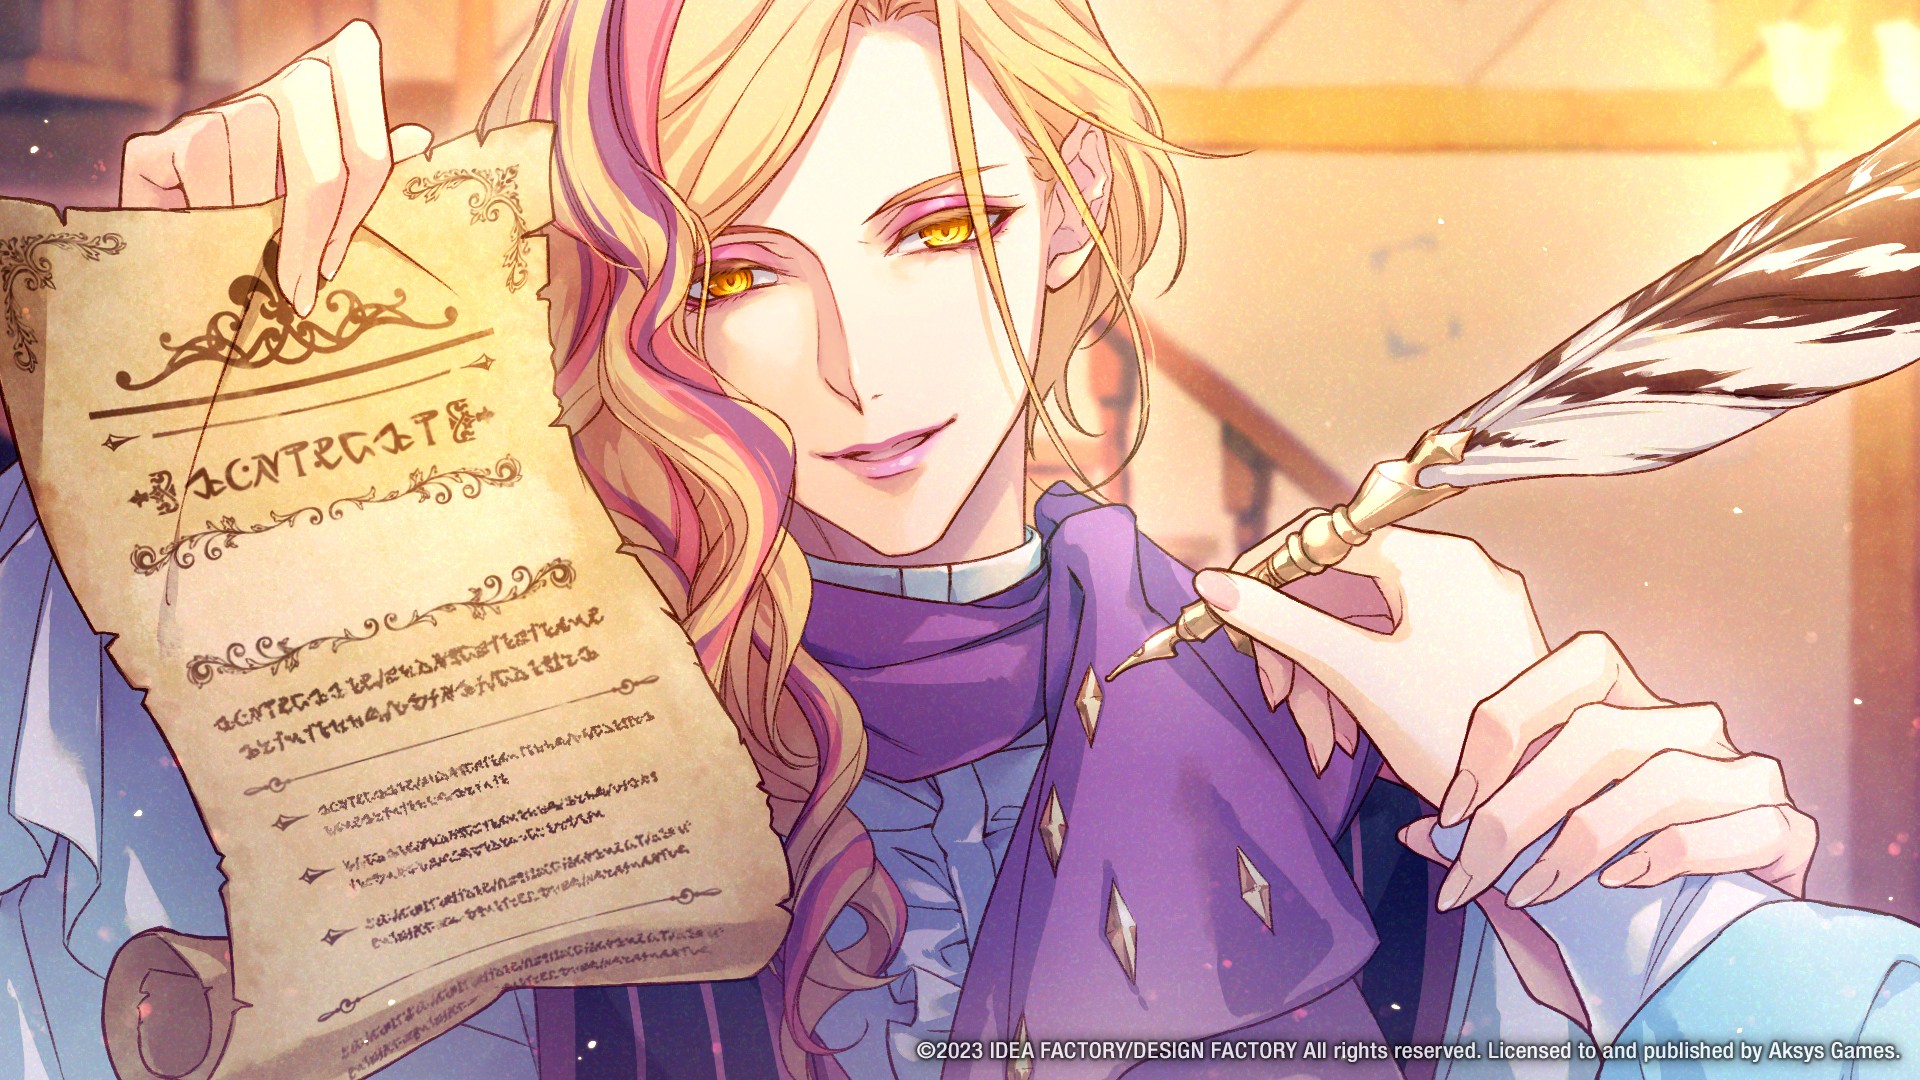 Radiant Tale Circus-Themed Otome Game Heading West in Summer 2023